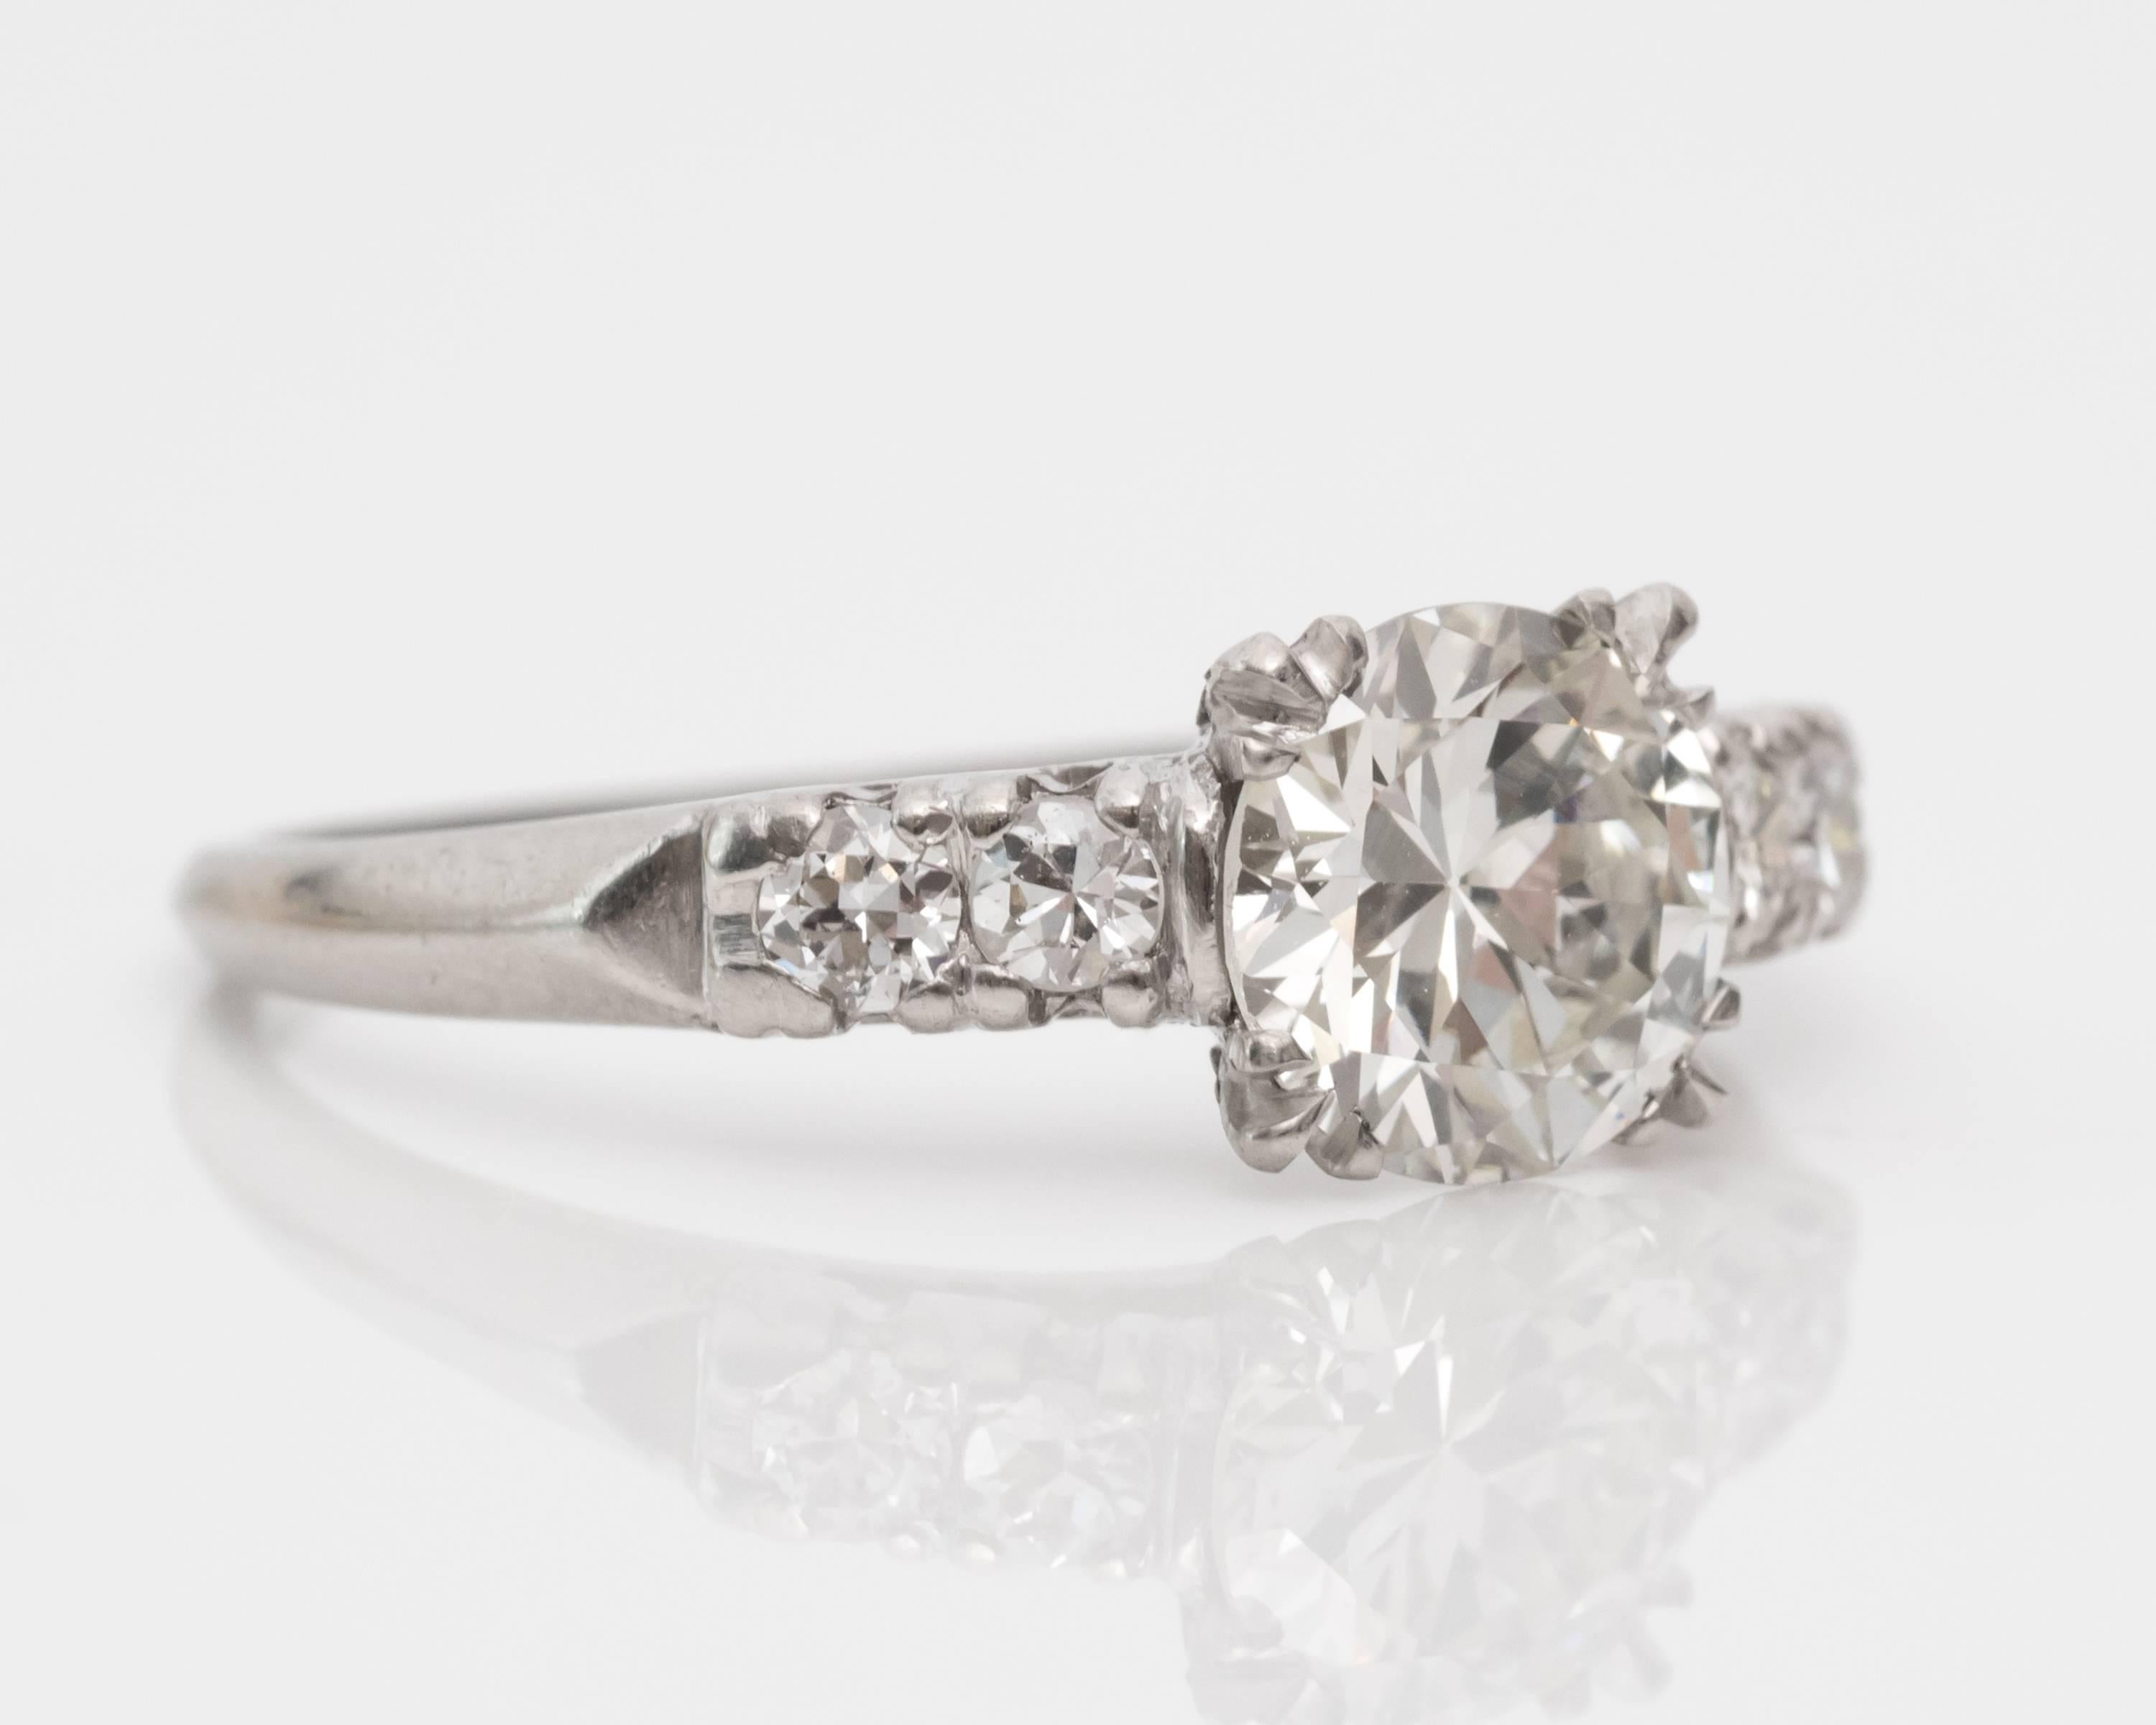 1935 Art Deco Diamond Engagement Ring Featuring GIA-Certified Center Stone weighing 0.99 Carats
Set in Four Triple-Fishtail Prongs 
Tapers to a Smooth Platinum Shank that features Four Accent Diamonds.
Simple Sleek Design with All Attention on the